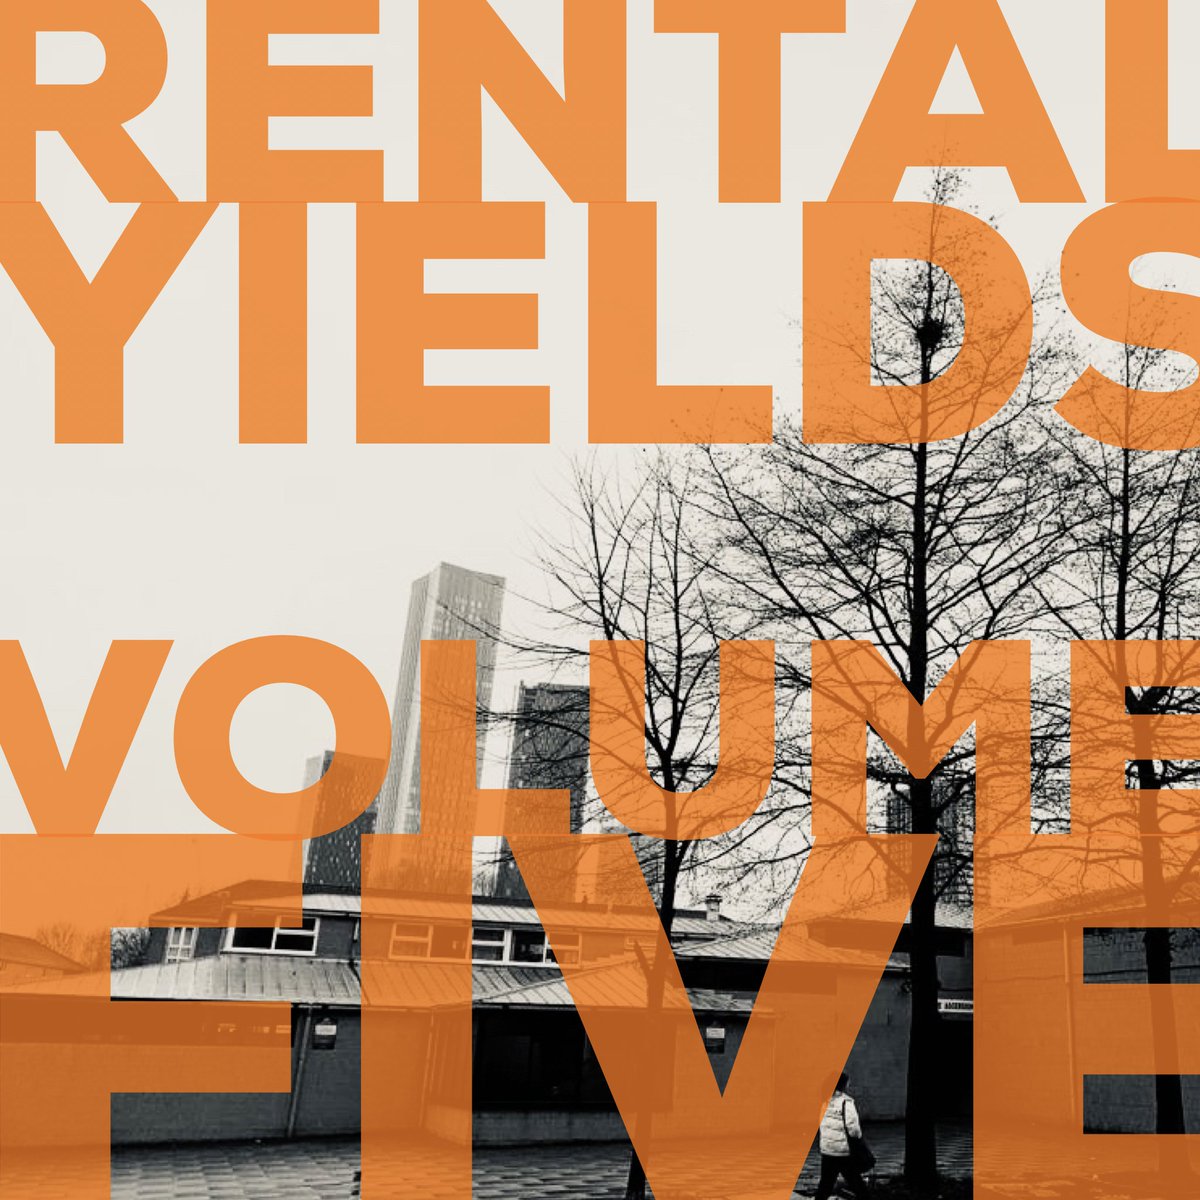 Really bloody thrilled to present RENTAL YIELDS VOLUME FIVE. Our journey ends soon, but not before this beauty... Grab it here - fandf.bandcamp.com/album/rental-y… 'Who ever wrote a love letter in pencil? No-one. Or no-one who meant it, anyway.'